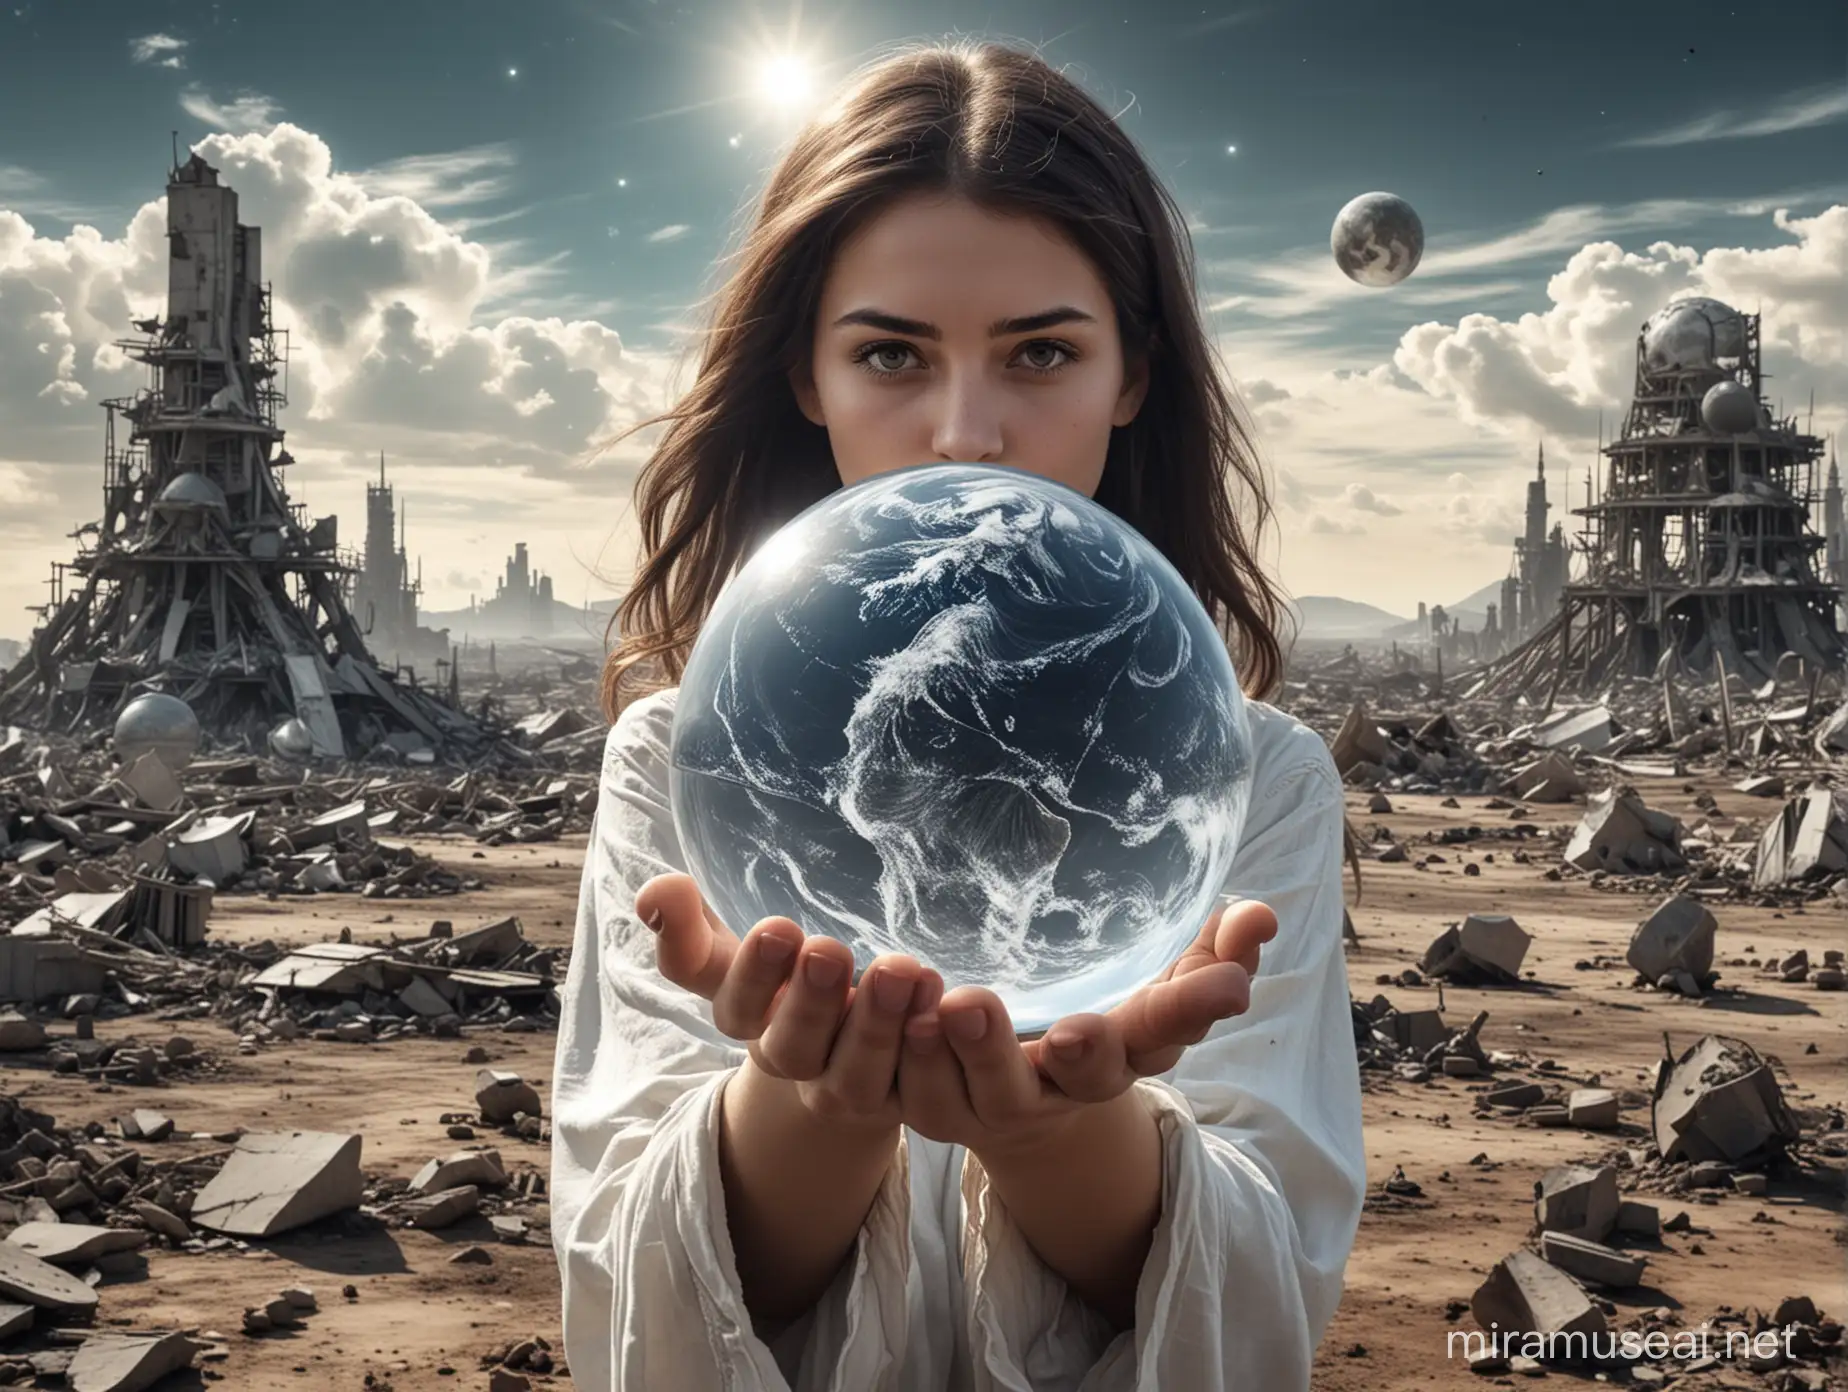 Clairvoyant Girl Holding Earth Amidst Destruction on Alien Planet